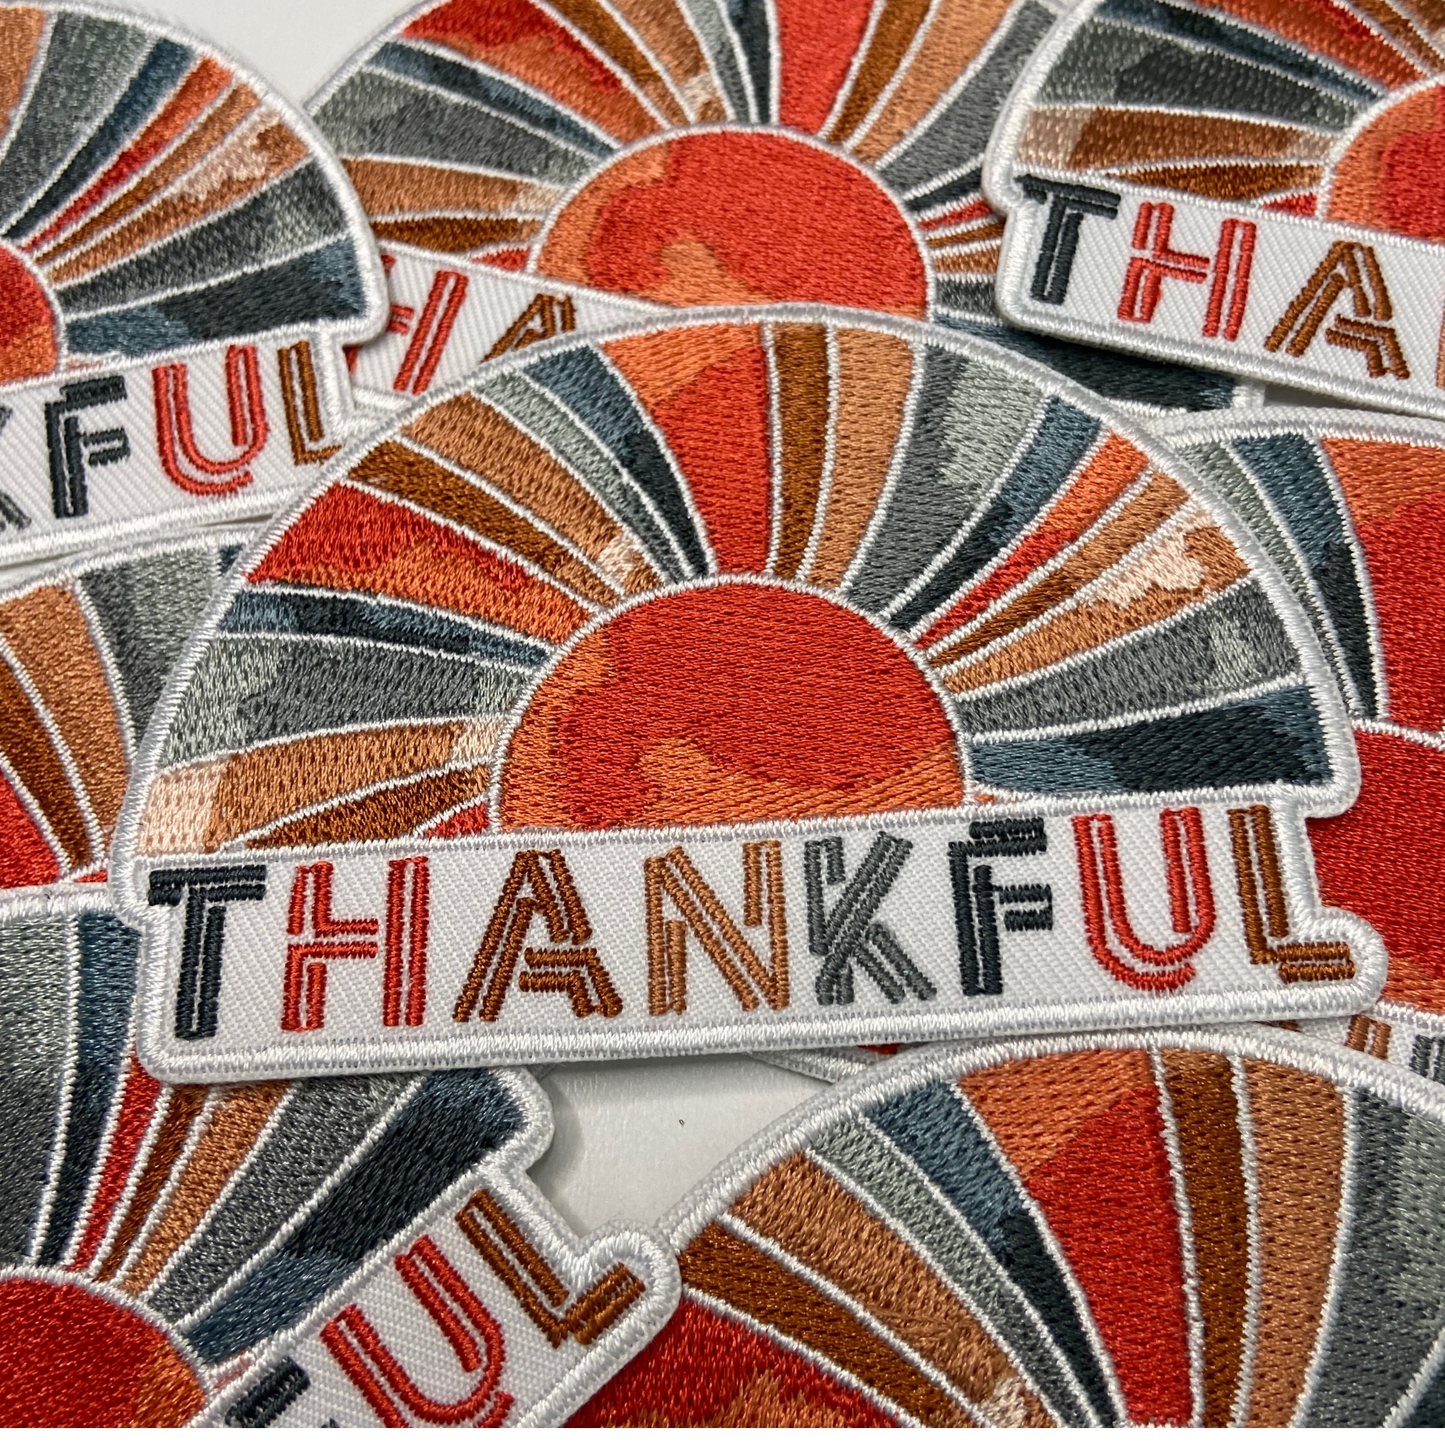 3 1/2" Thankful Sunrise -   Embroidered Hat Patch